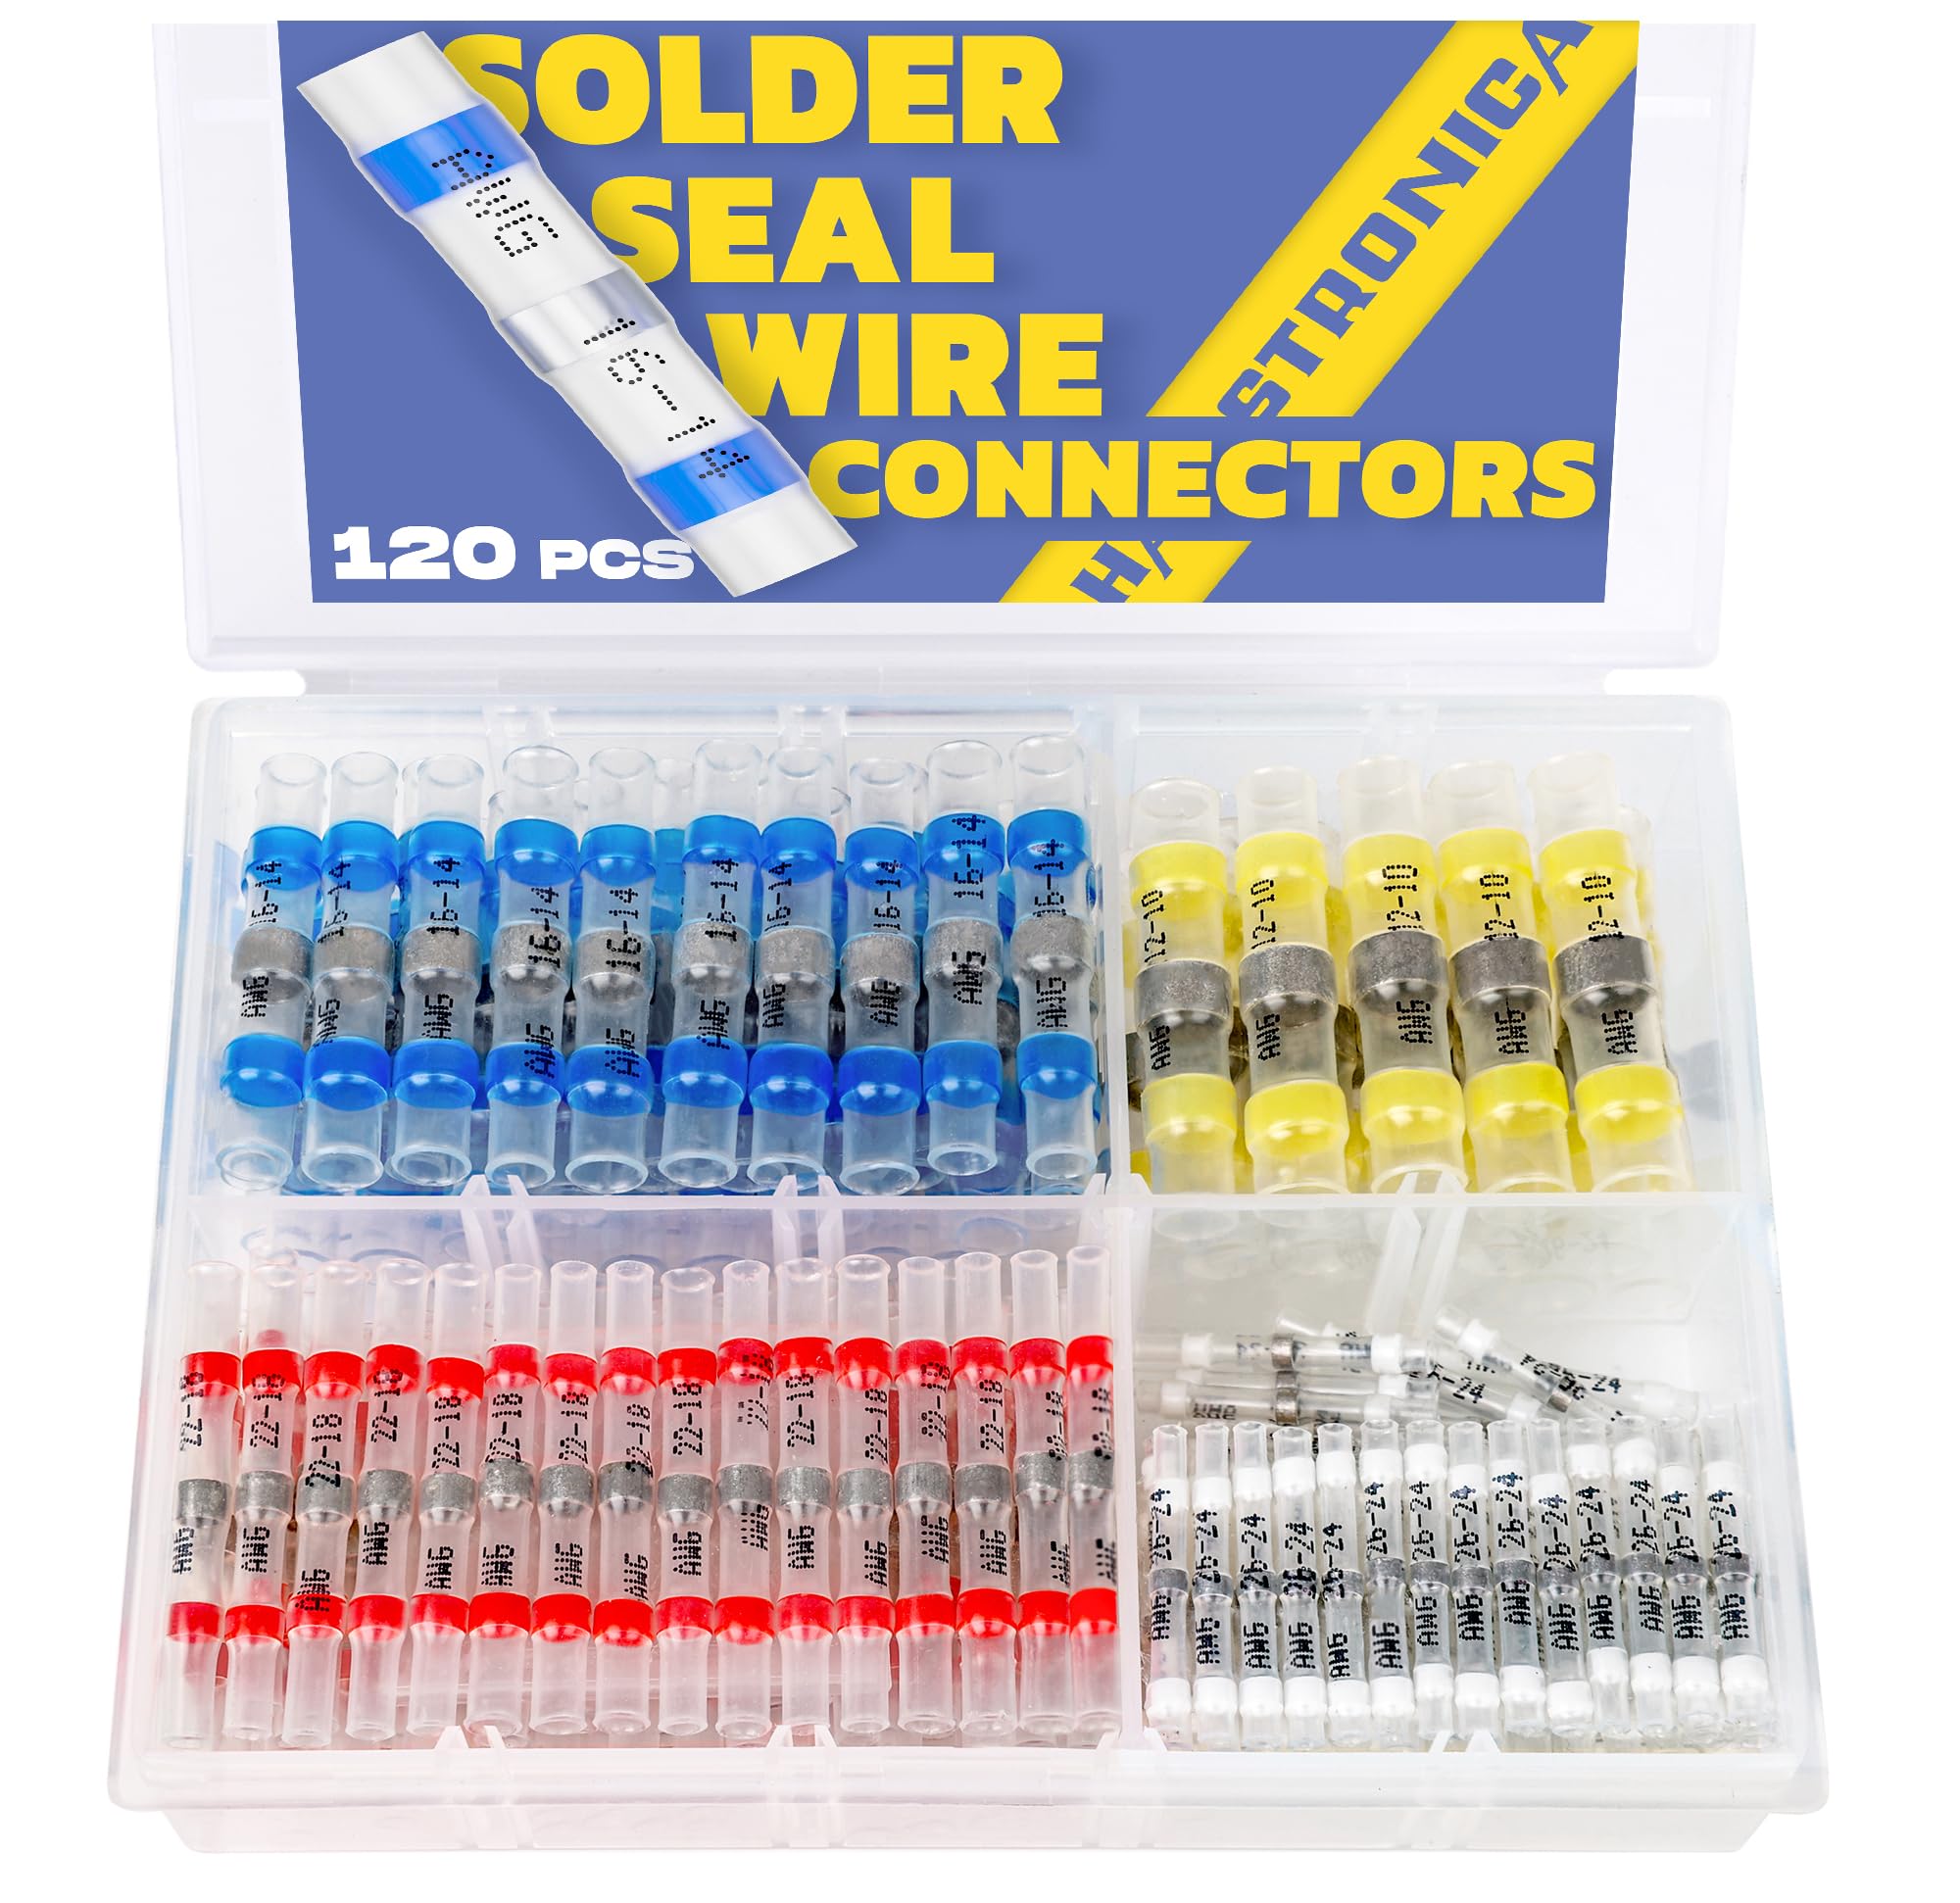 haisstronica 120PCS Solder Seal Wire Connectors-Marine Grade Heat Shrink Wire Connectors-Heat Shrink Butt Connectors-Butt Splice Wire Connectors for Stereo,Electrical with Corrosion and Weatherproof